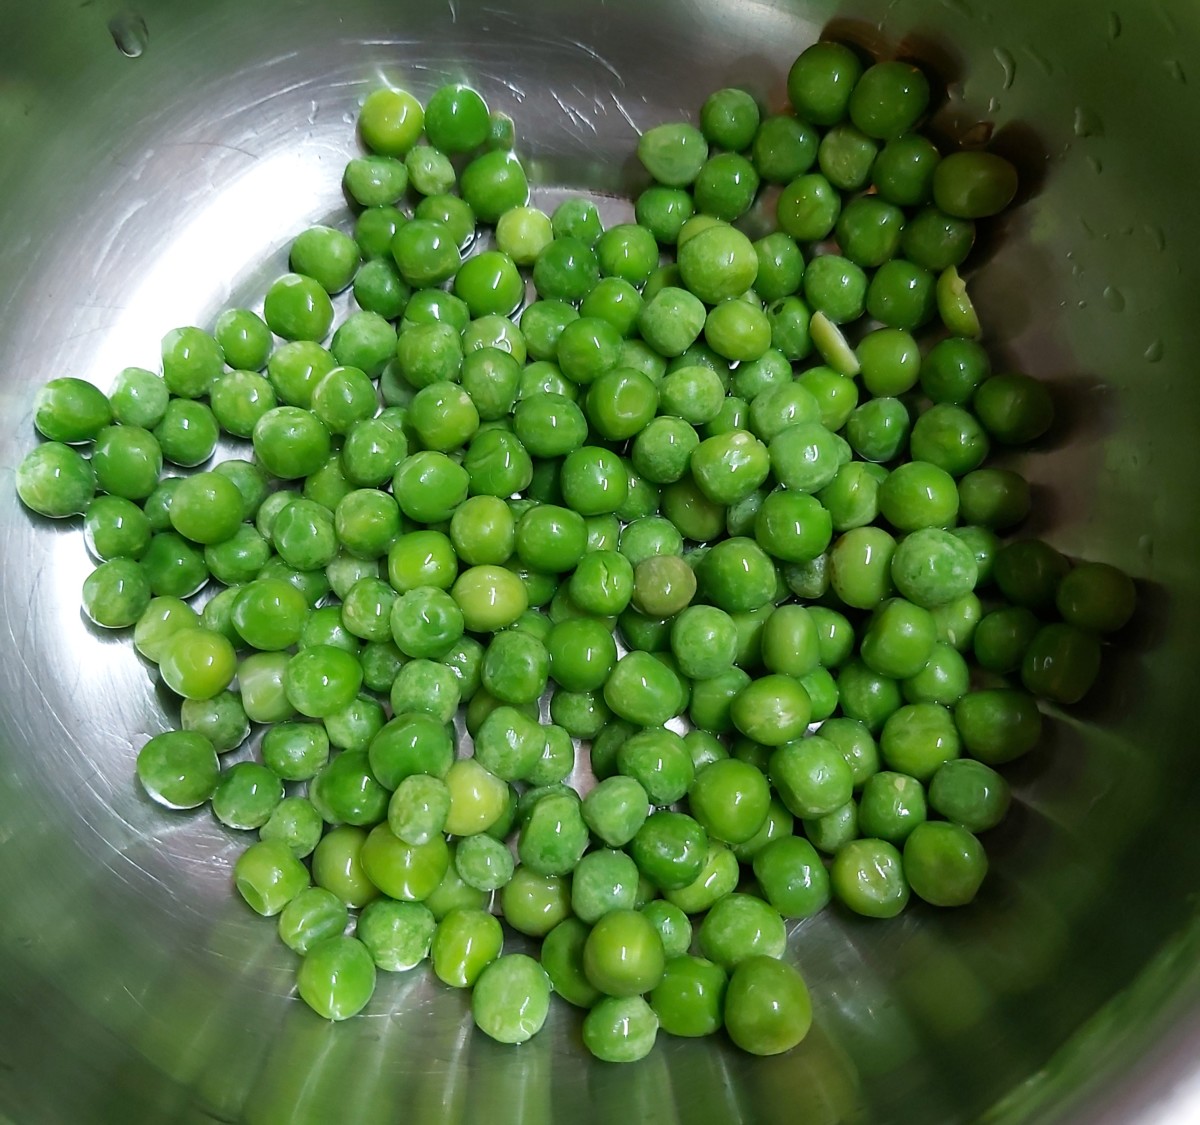 Wash 1/2 cup of peas and set aside (you can use dry, fresh or frozen peas).